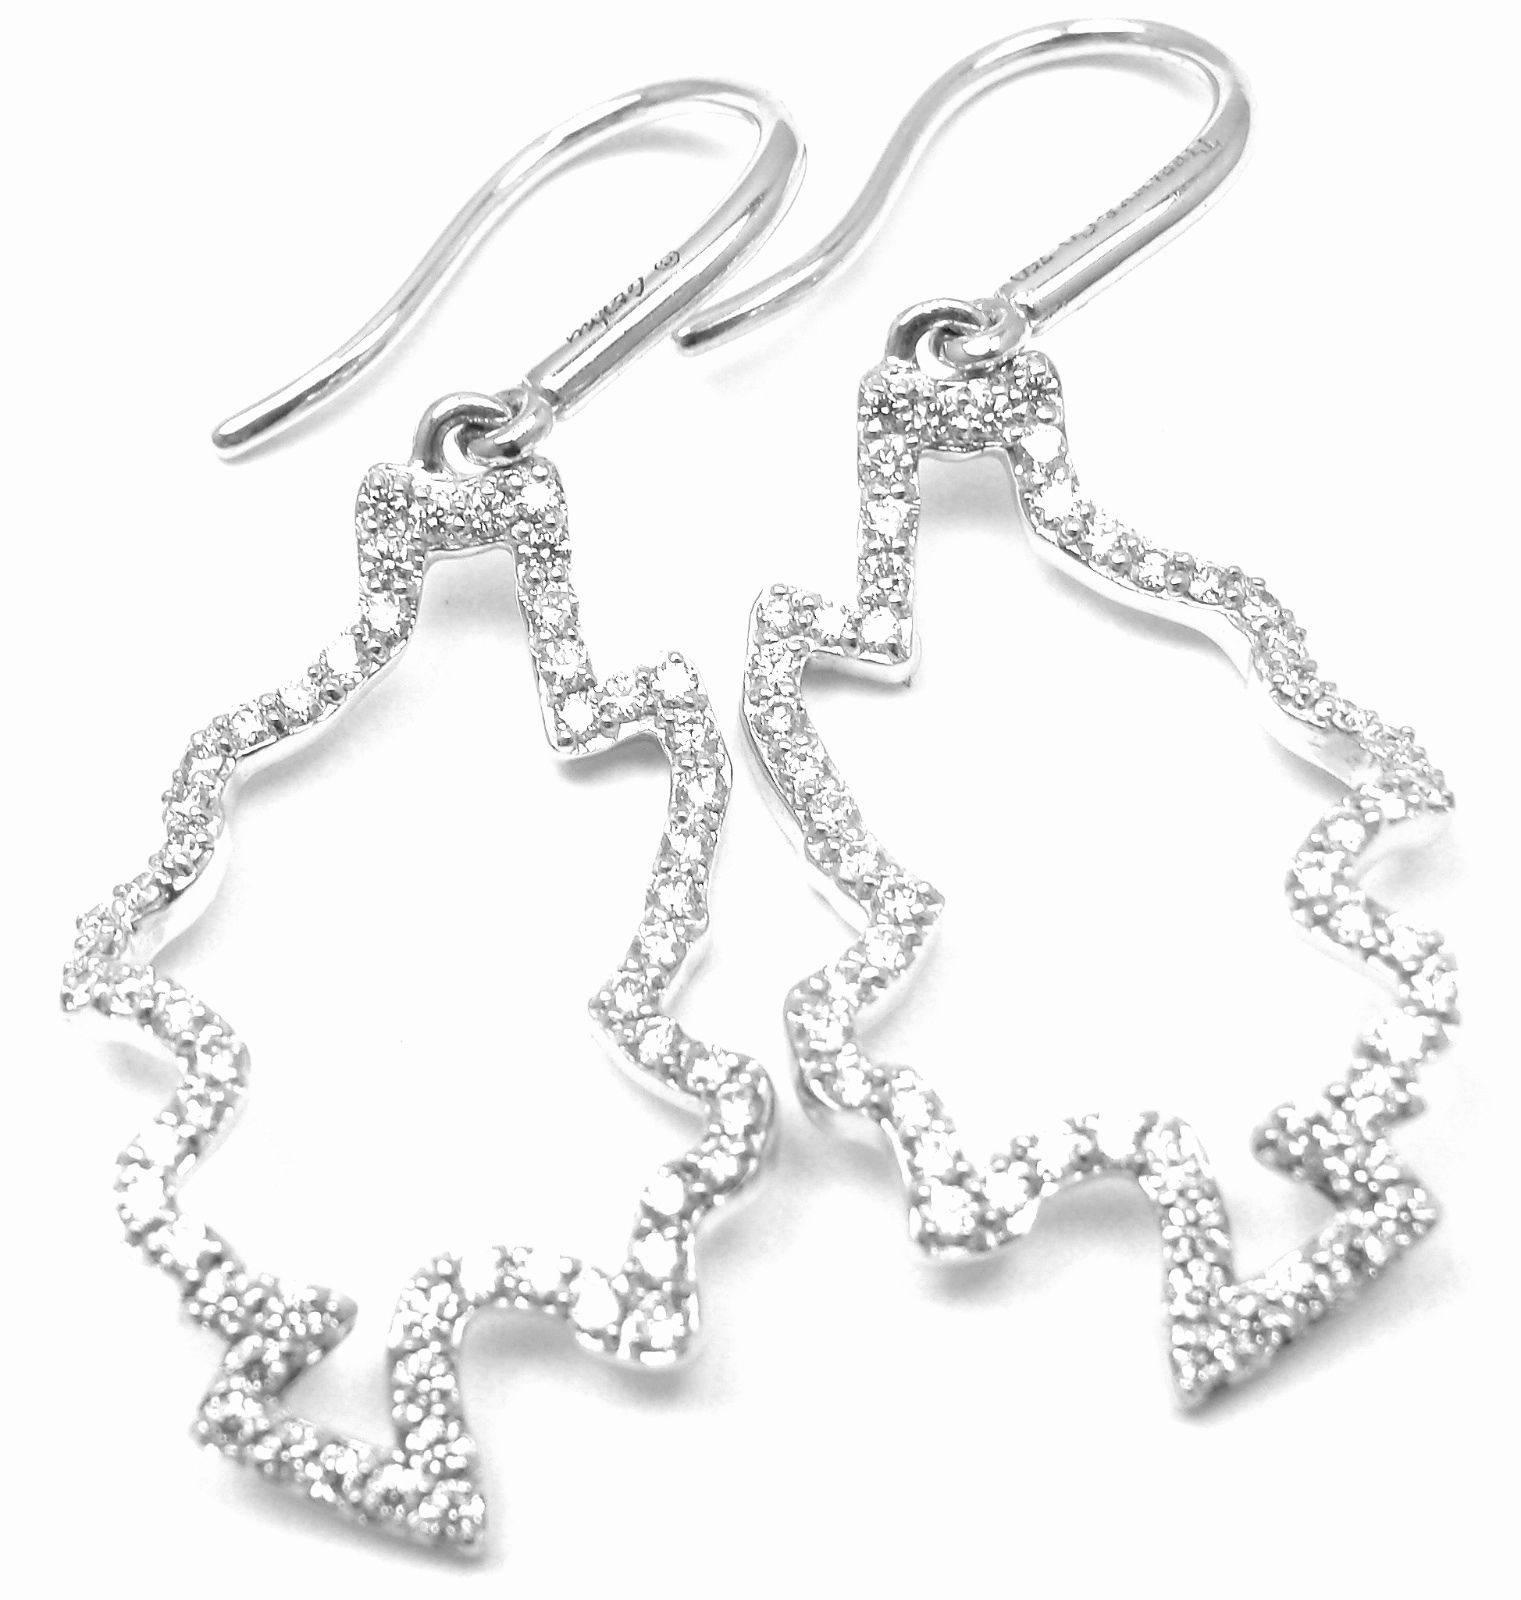 18k White Gold Diamond Leaves Earrings by Frank Gehry
for Tiffany & Co. 
With 112 round brilliant cut diamonds VS1 clarity, G Color .44ct

Details: 
Weight: 3.5 grams
Dimensions: 324mm x 3.5mm
Stamped Hallmarks: Tiffany & Co Gehry 750
*Free